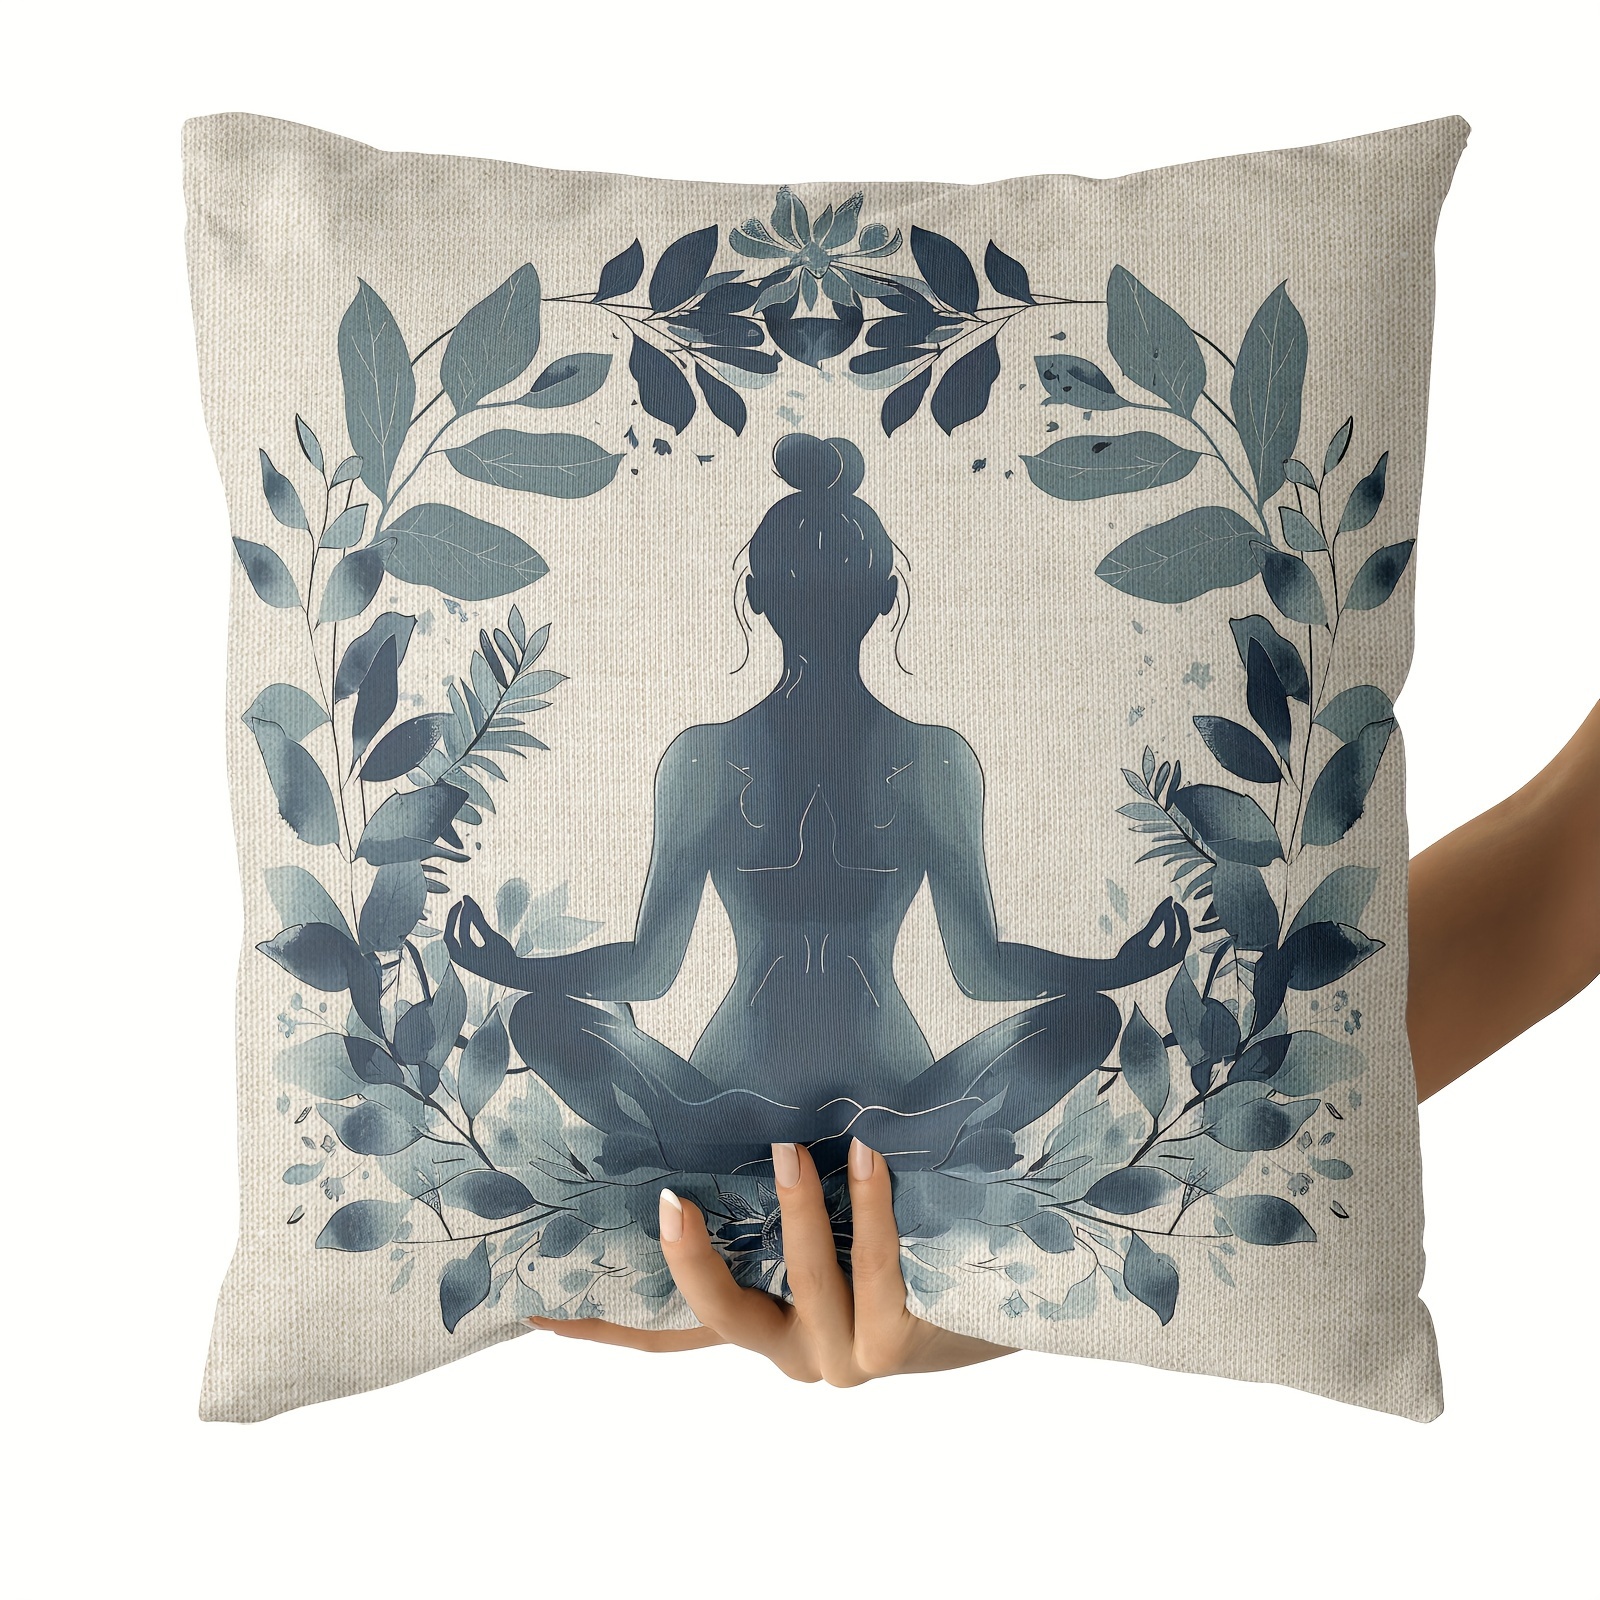 

1pc, Meditation Woman Silhouette Yoga Throw Pillow Cover, 18x18 Inches, Contemporary Style, Linen Decorative Cushion Case For Sofa, Bed, Car, Home Decor, Outdoor Use